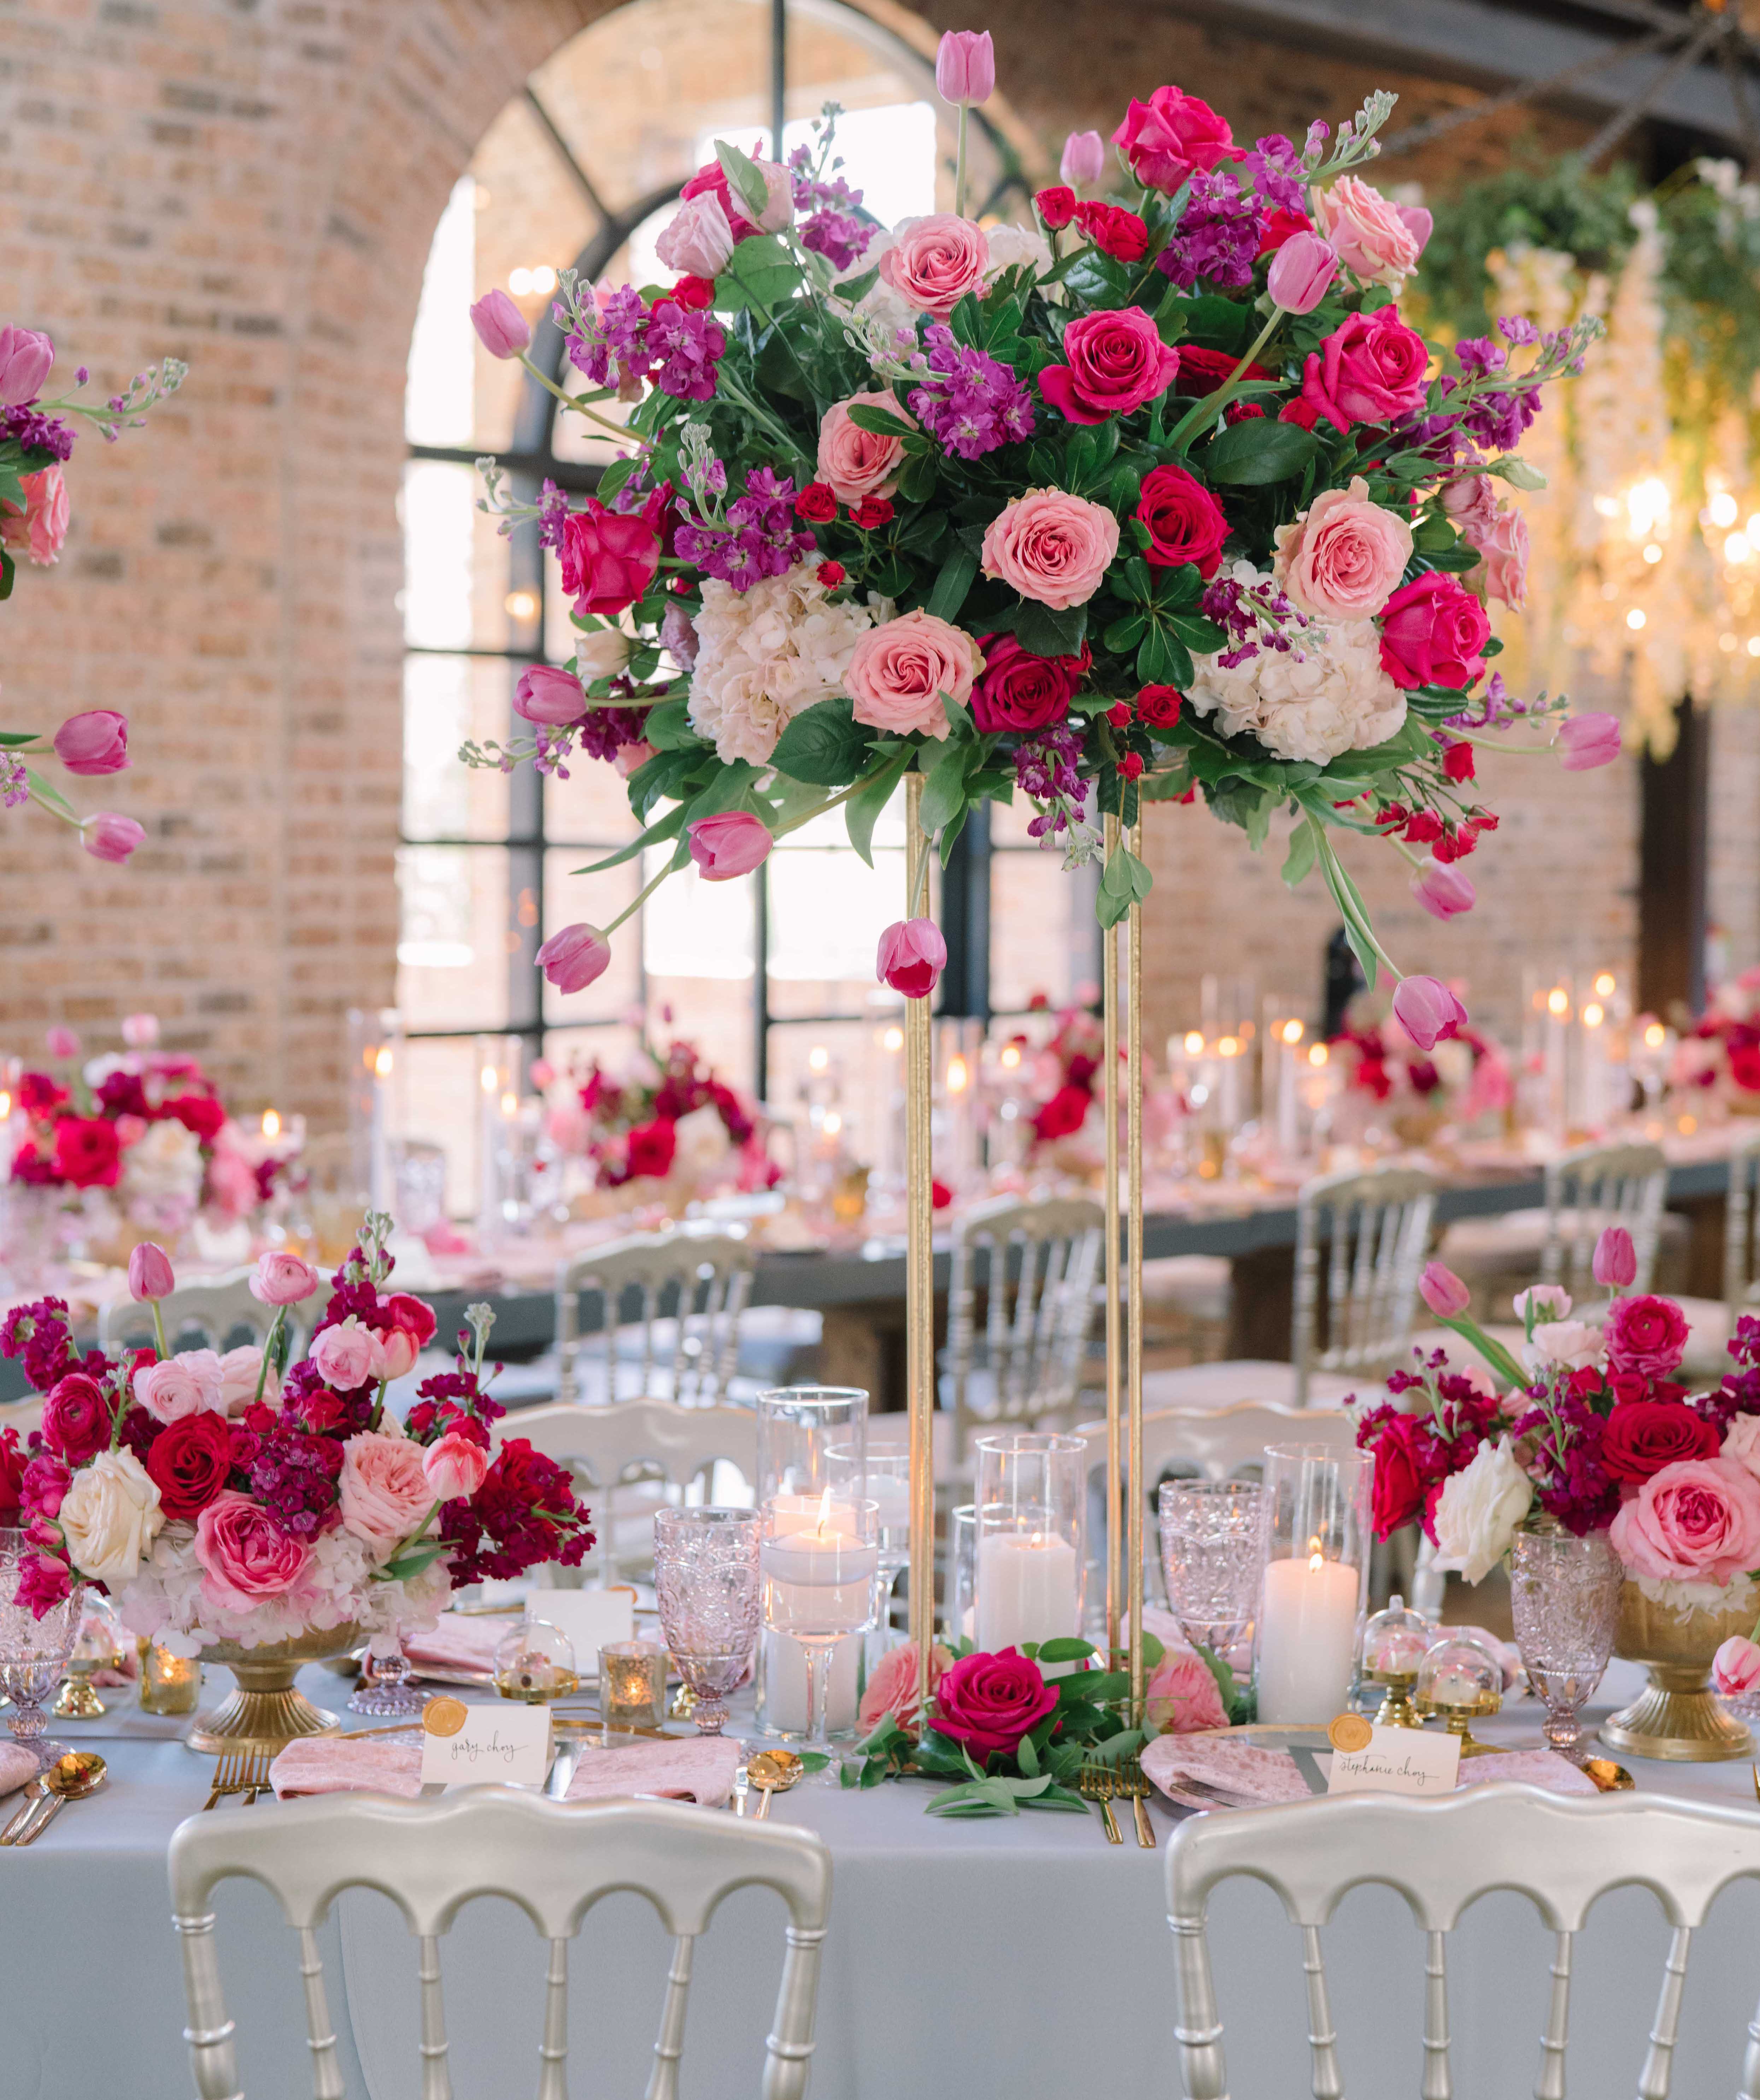 A bright pink wedding ceremony with pink flowers including roses, peonies, tulips and ranunculus. Summer Wedding With a Vibrant Palette of Pink